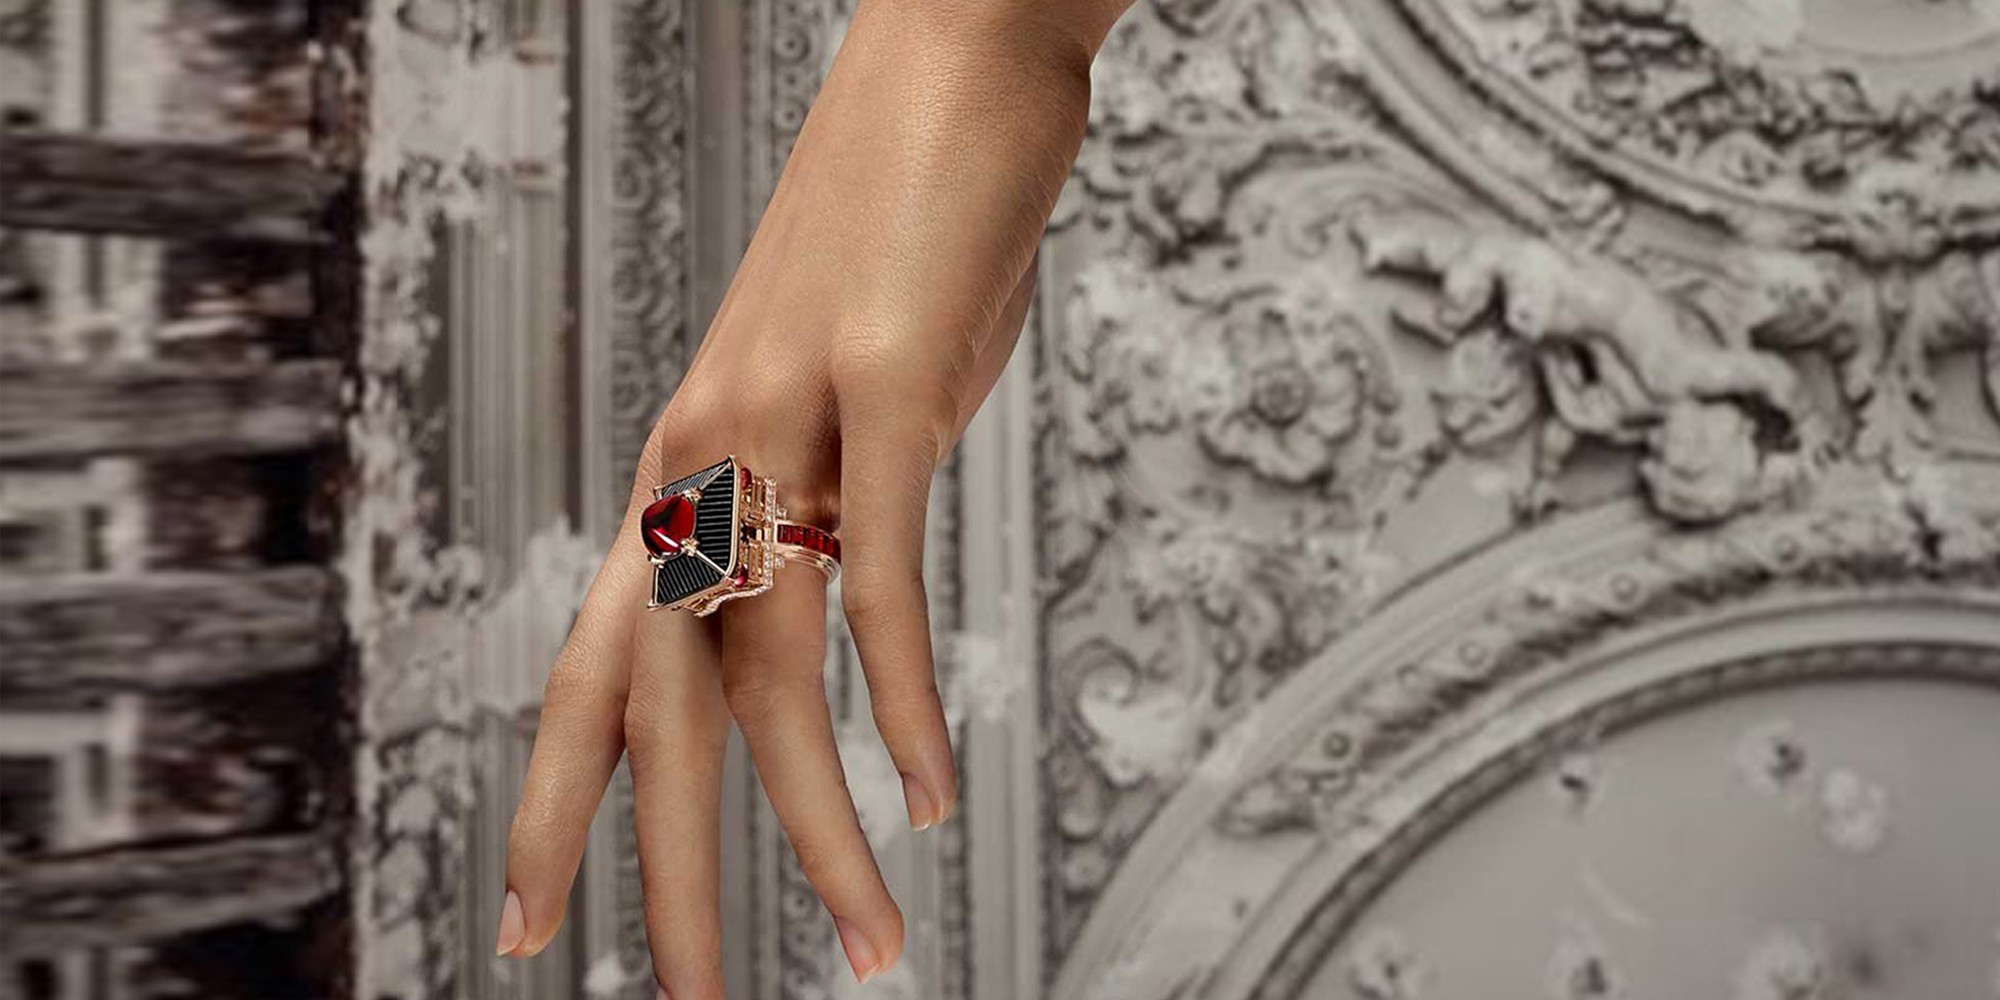 CHAUMET TRESORS D'AILLEURS HIGH JEWELRY COLLECTION